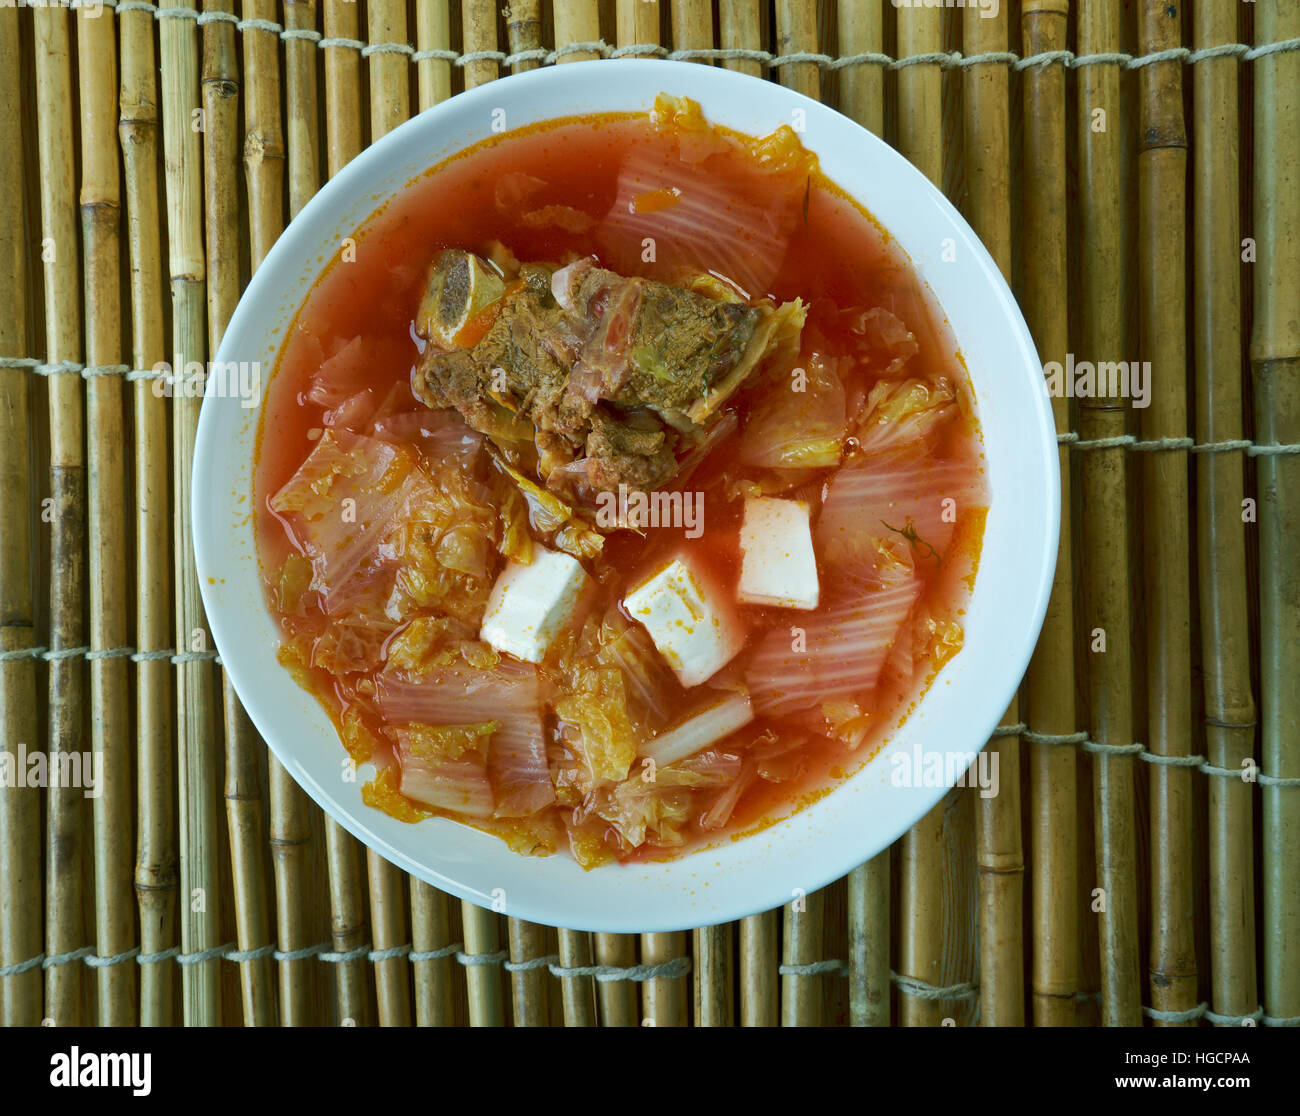 Korean signature Kimchi Stew in a hot ceramic pot served with other side  dishes Stock Photo - Alamy